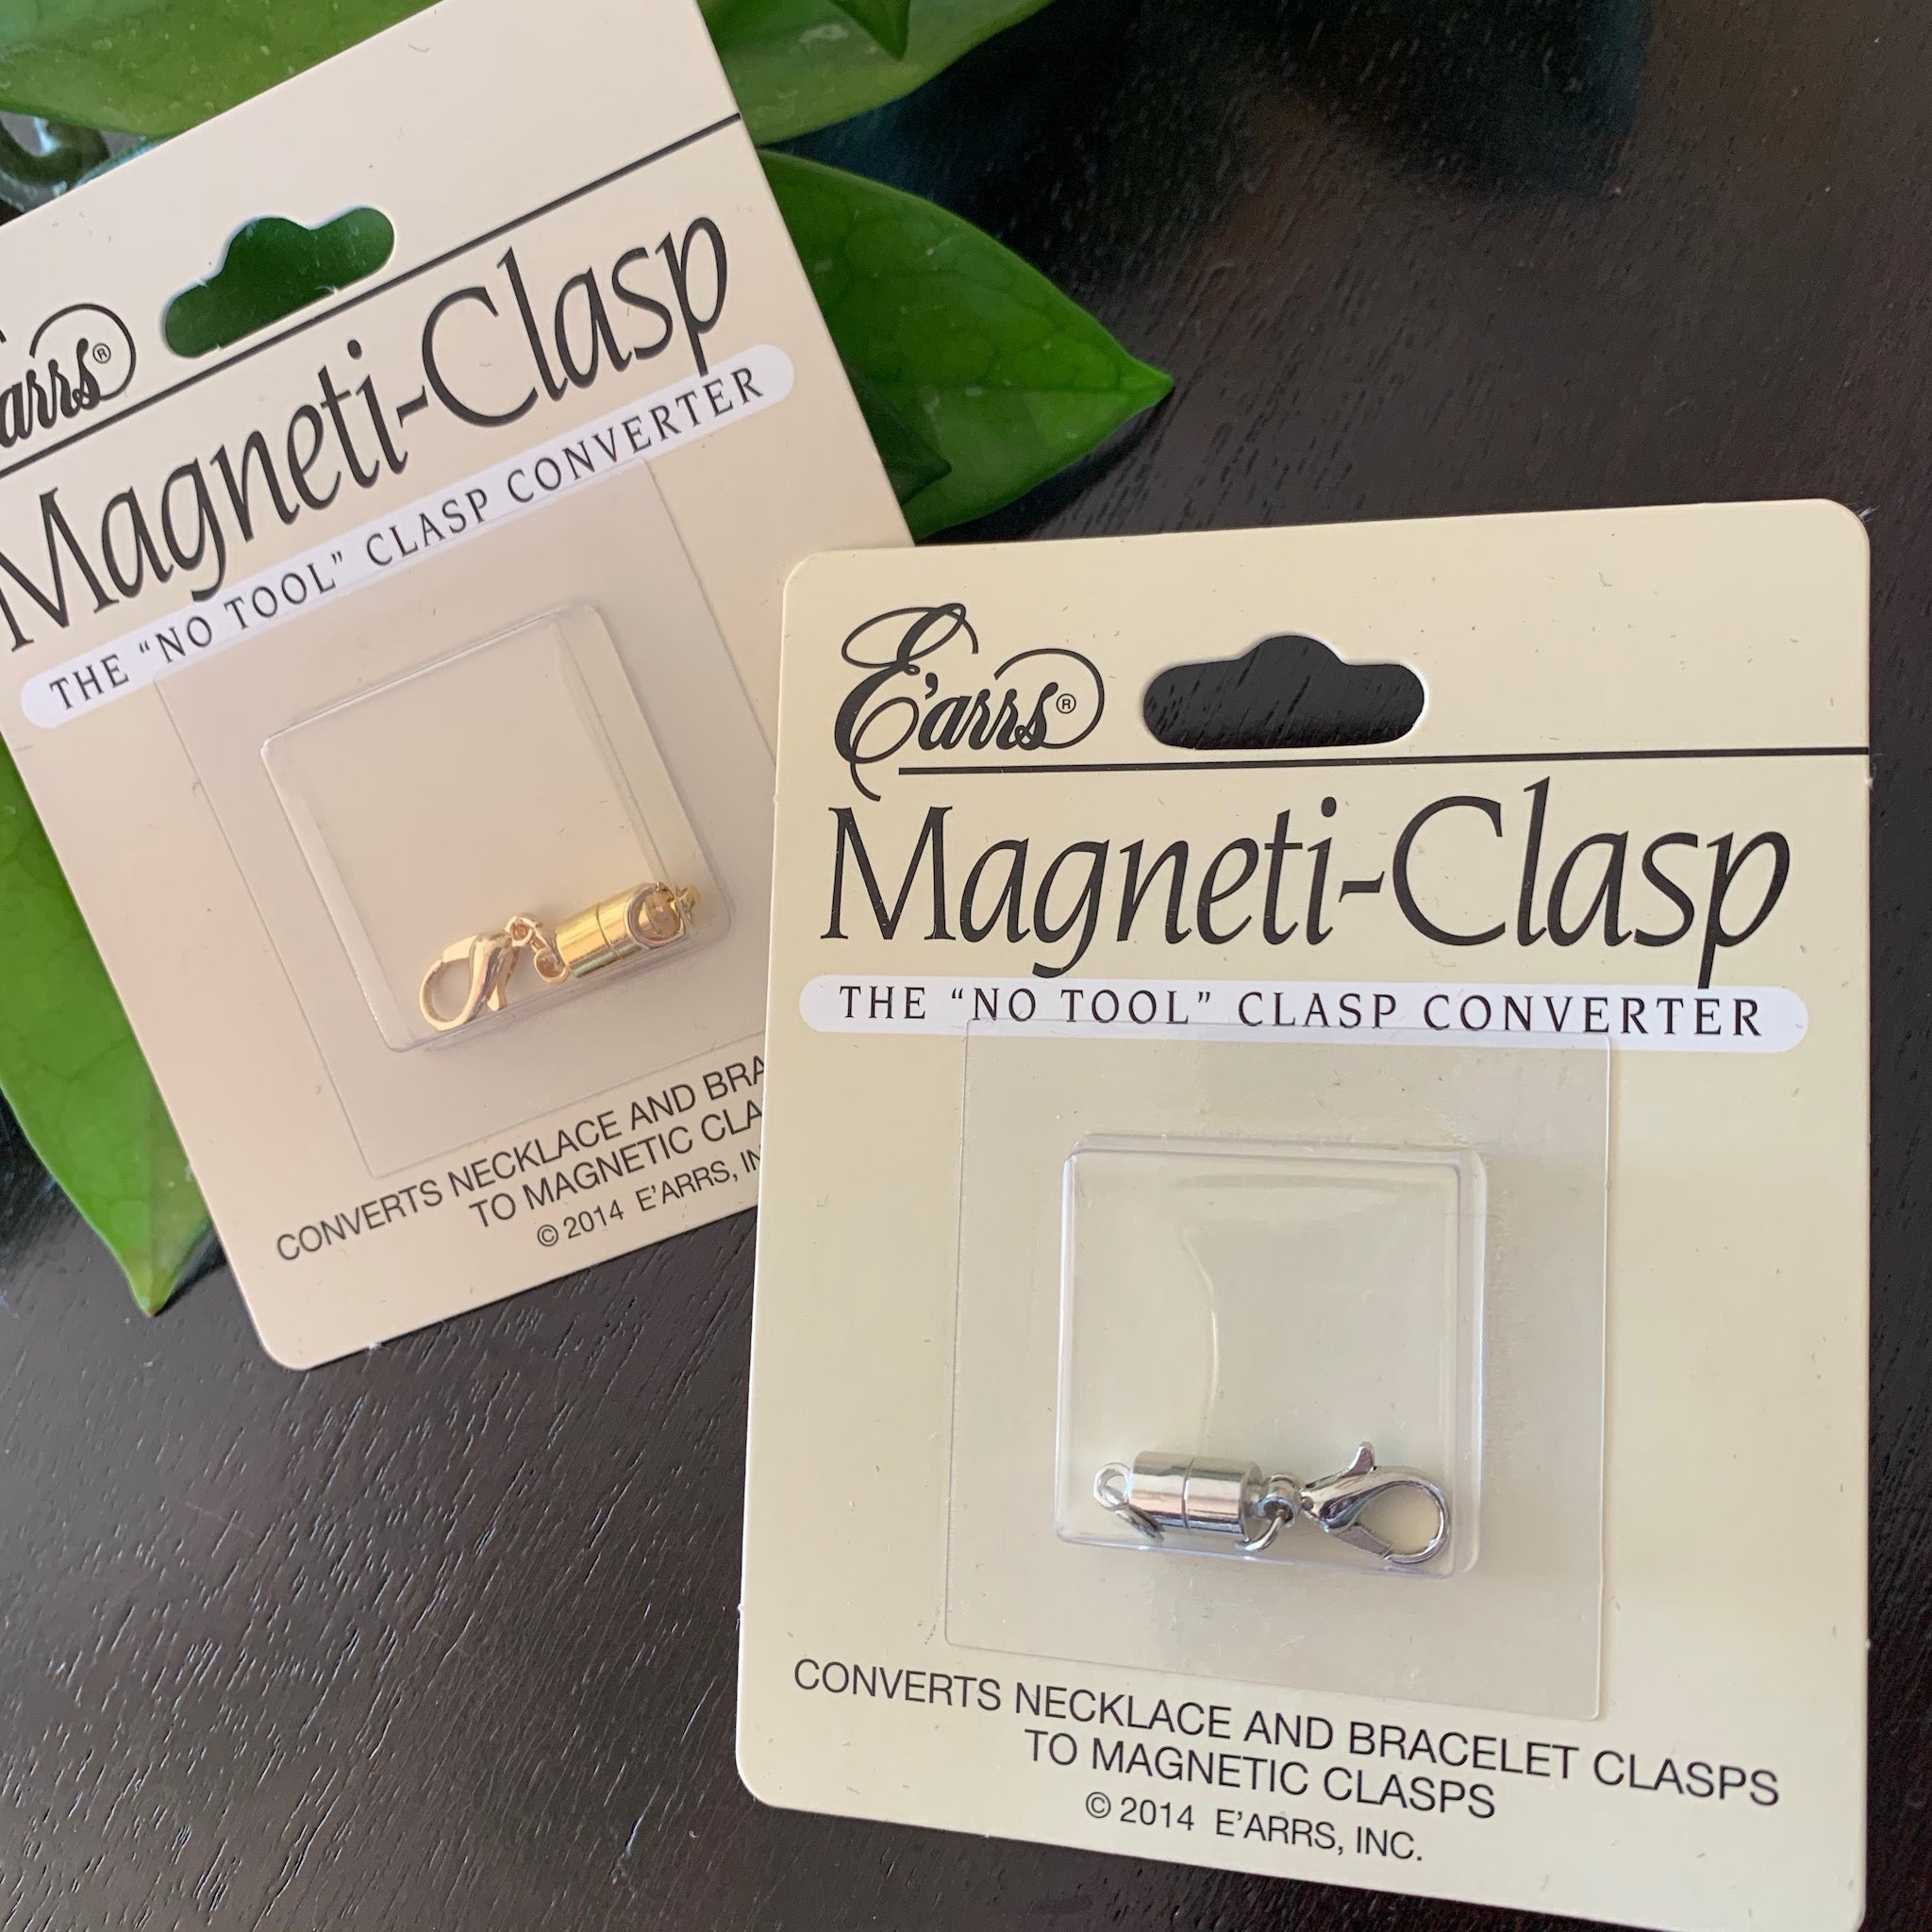 Magneti-Clasp by Earrs®, The No Tool Clasp Converter